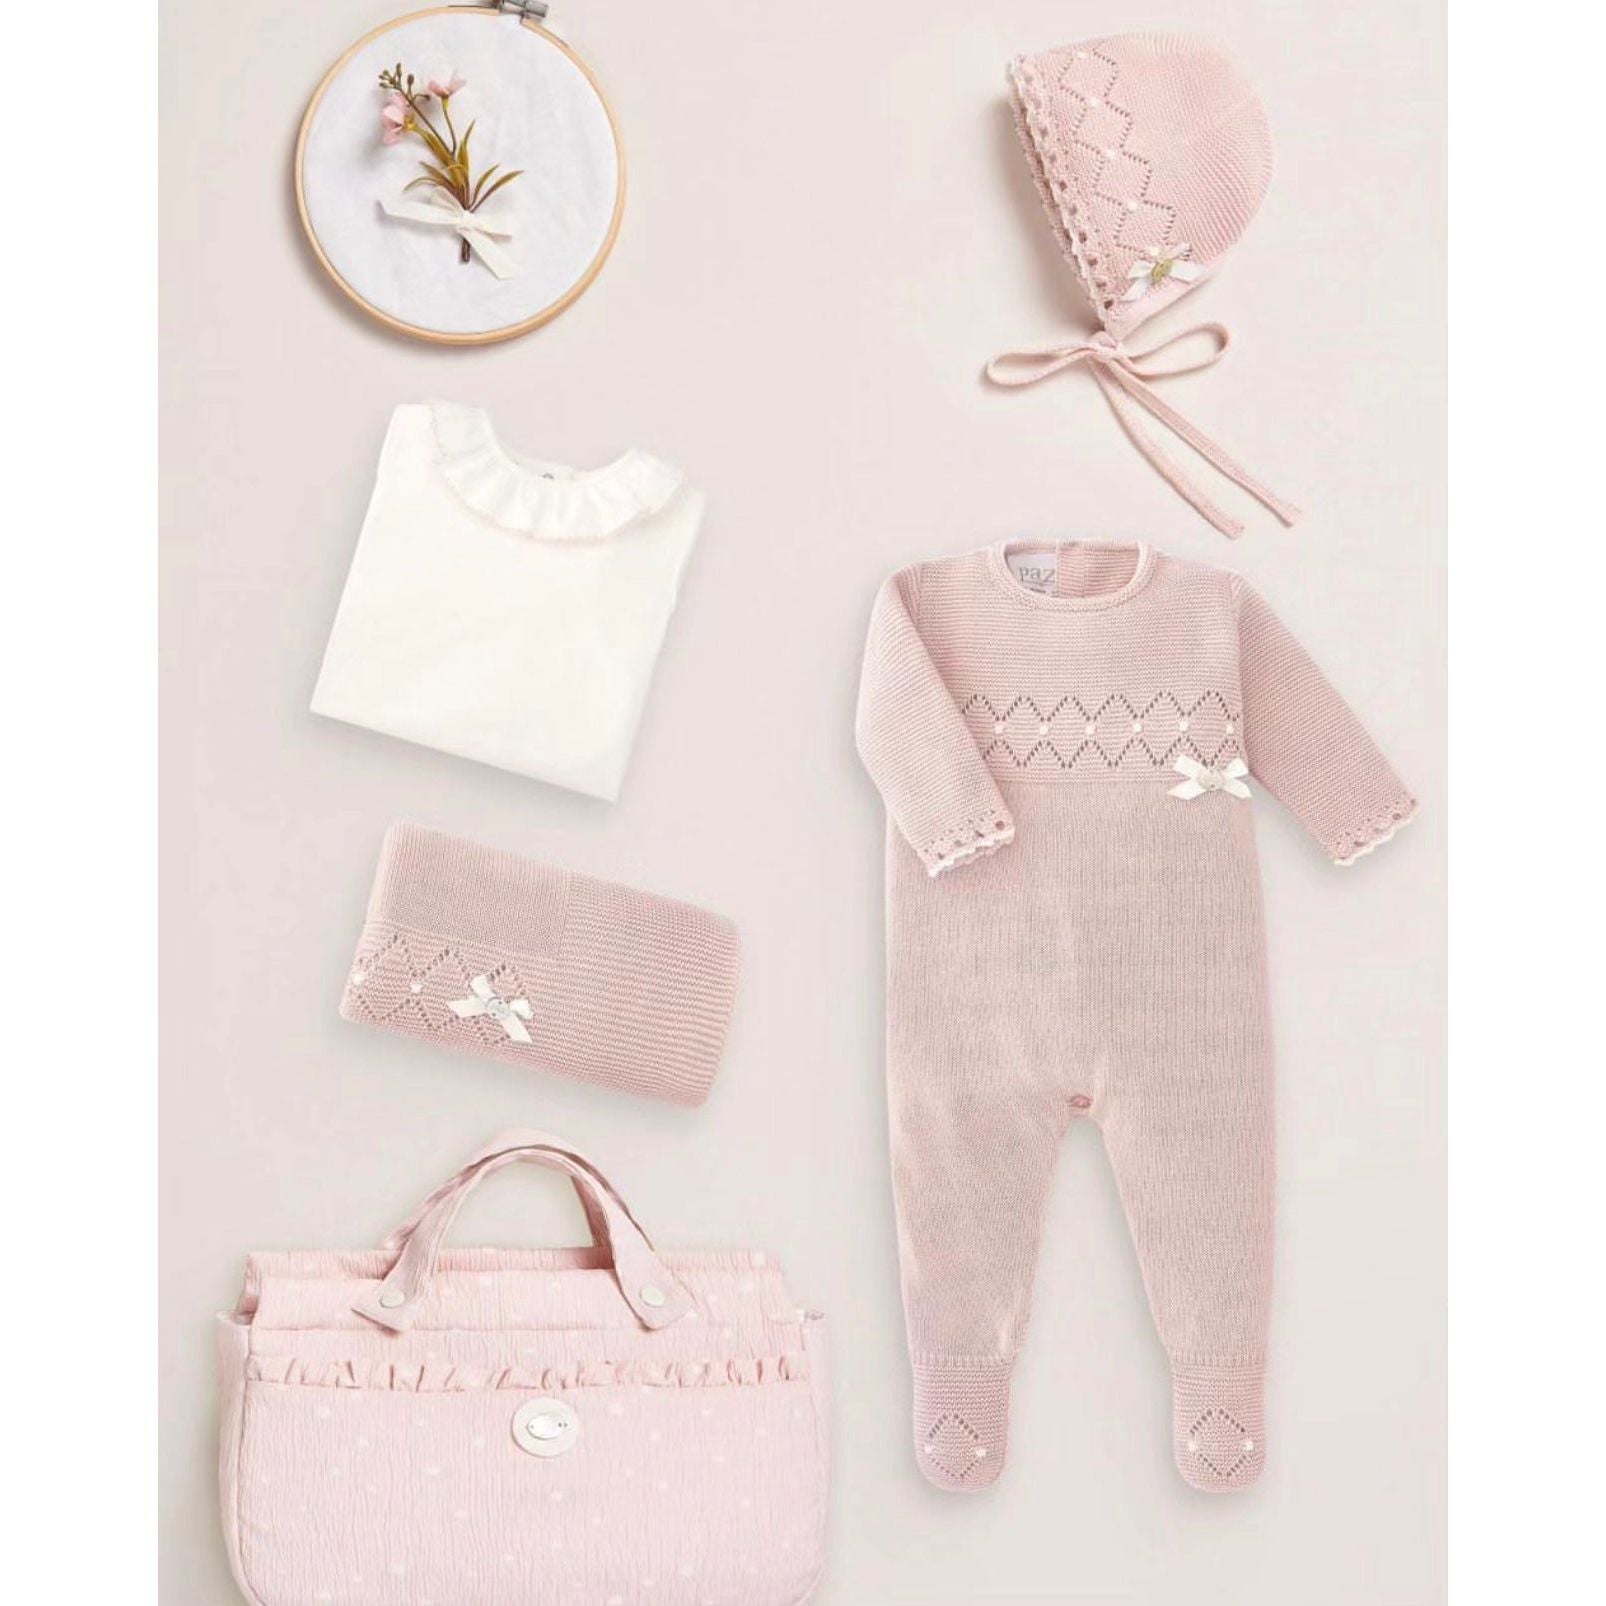 PROMESA KNIT OVERALL WITH KNIT BONNET